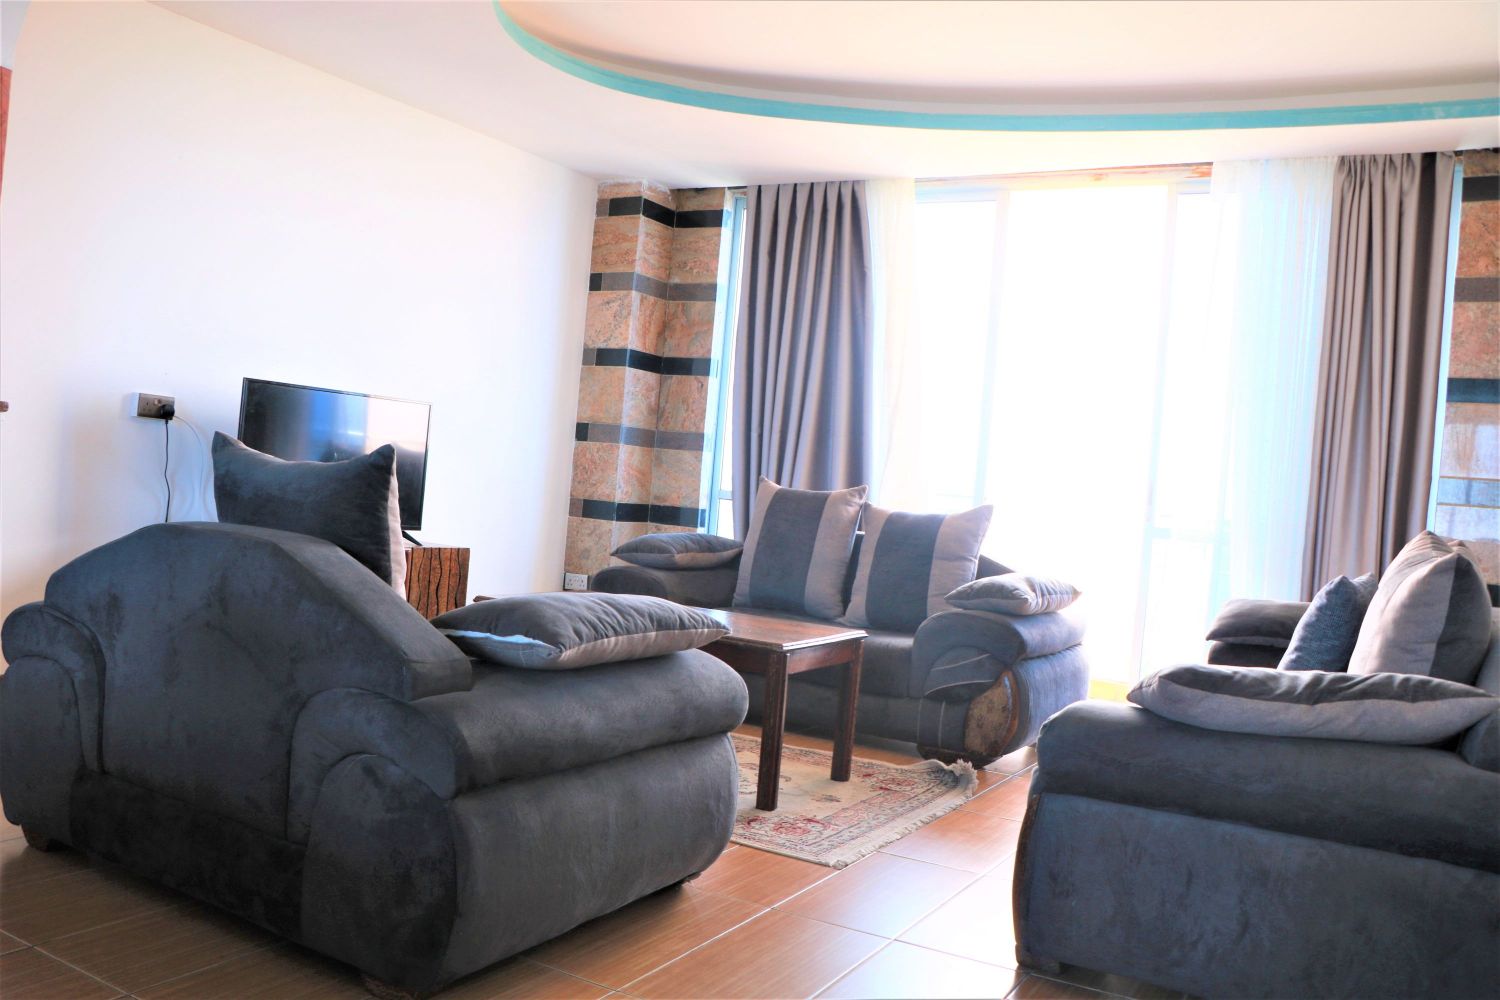 2bedroom apartment in Mombasa near beach. Affordable furnished Apartment for vacation in Mombasa | Zuru Life Africa